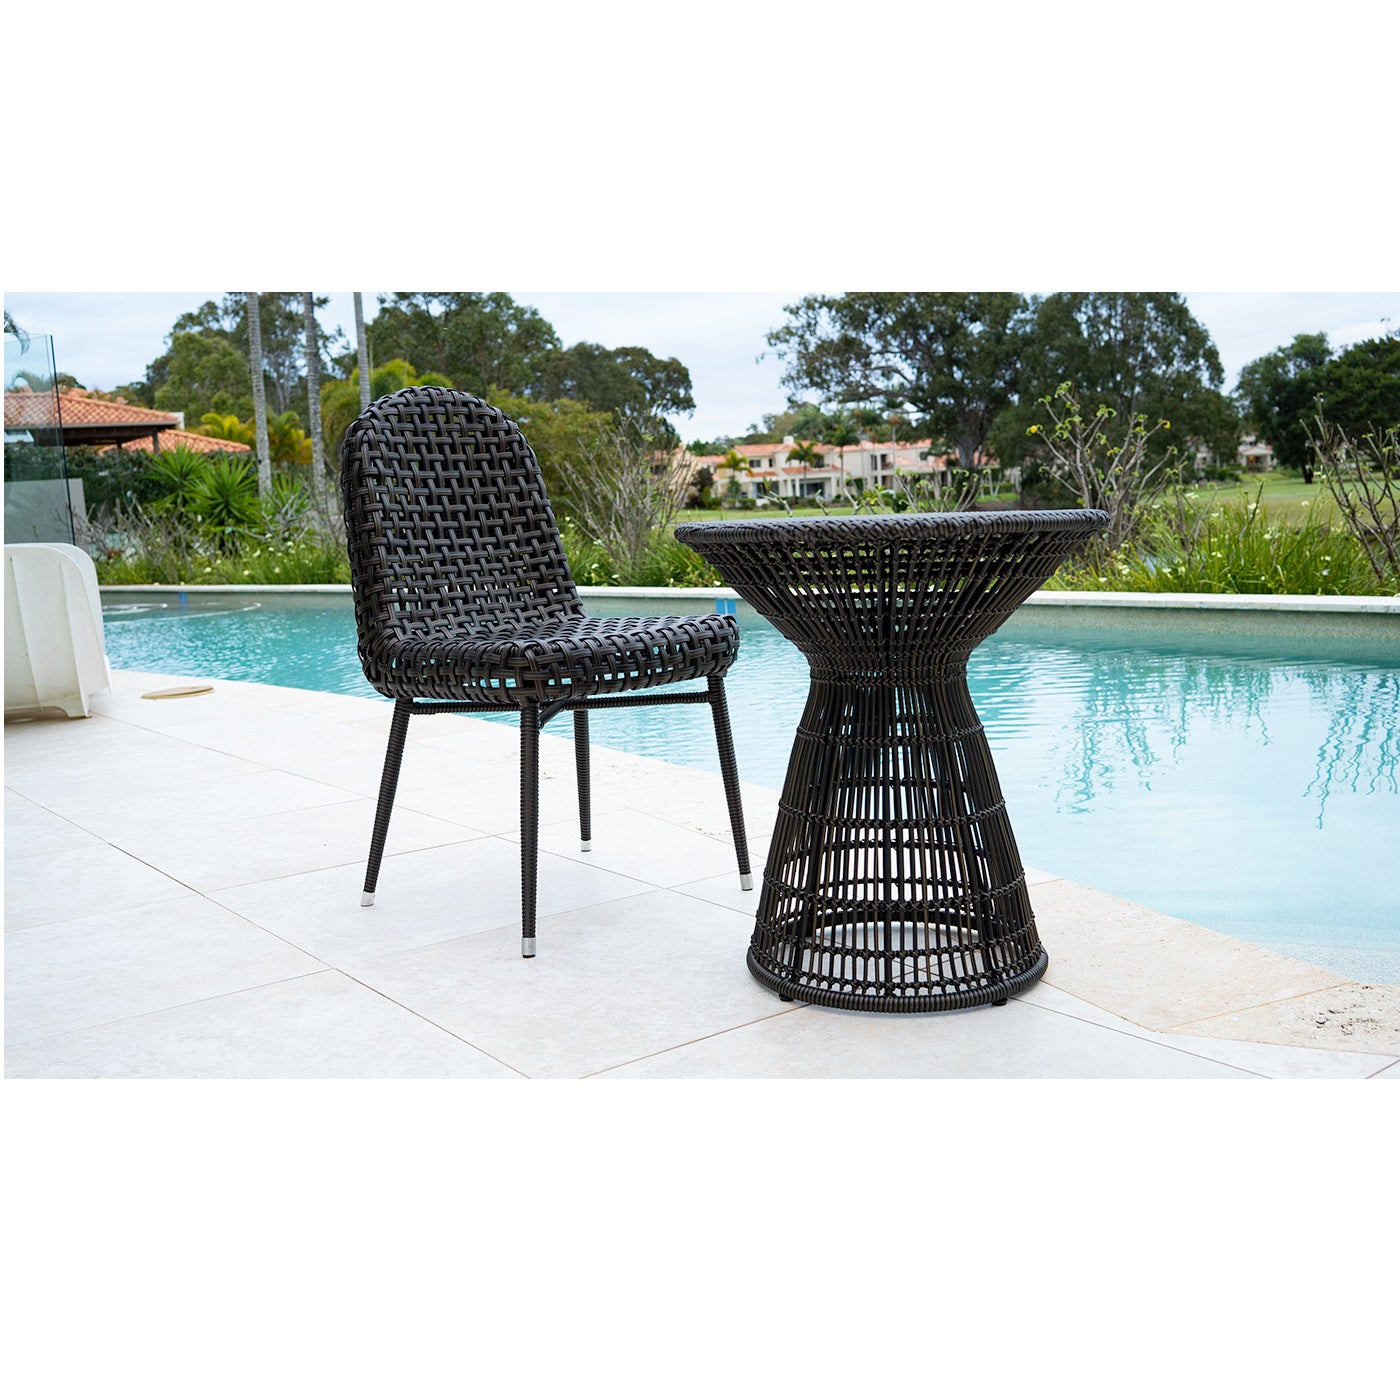 Remy Wicker Outdoor Dining Chair - Black - Notbrand